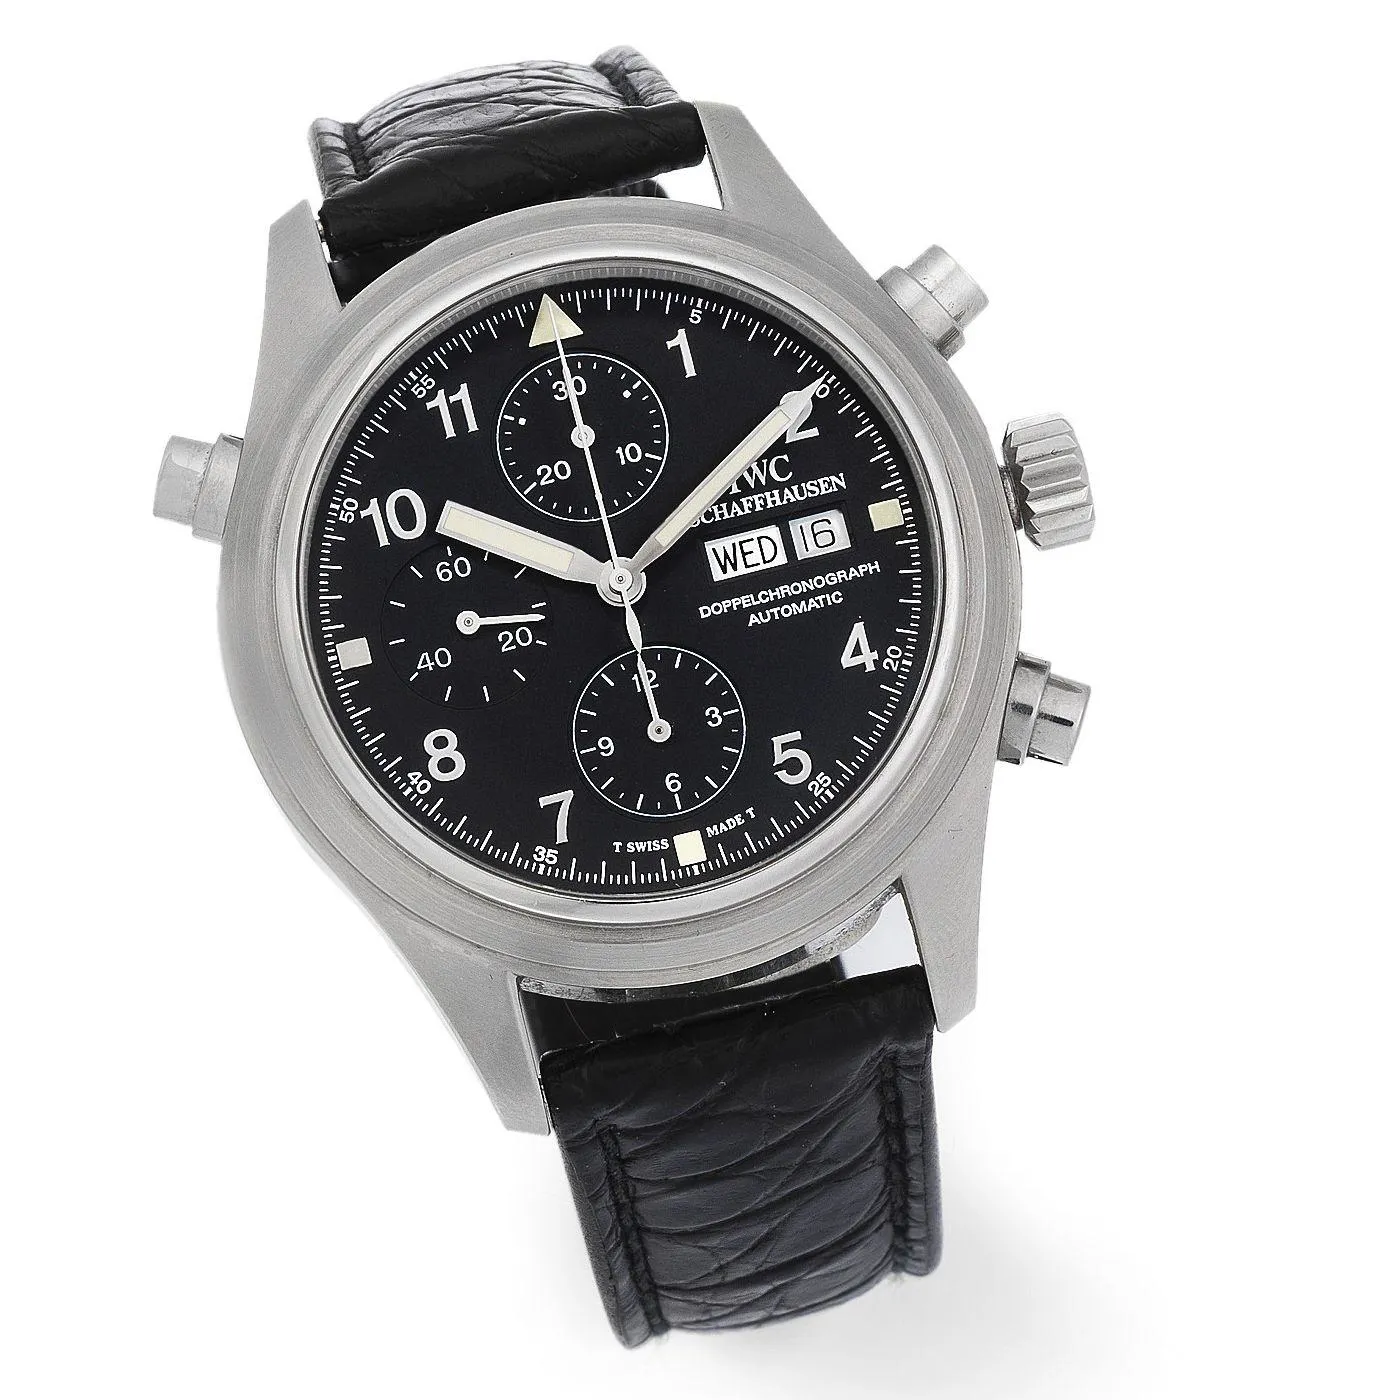 IWC 3713 42mm Stainless steel Black